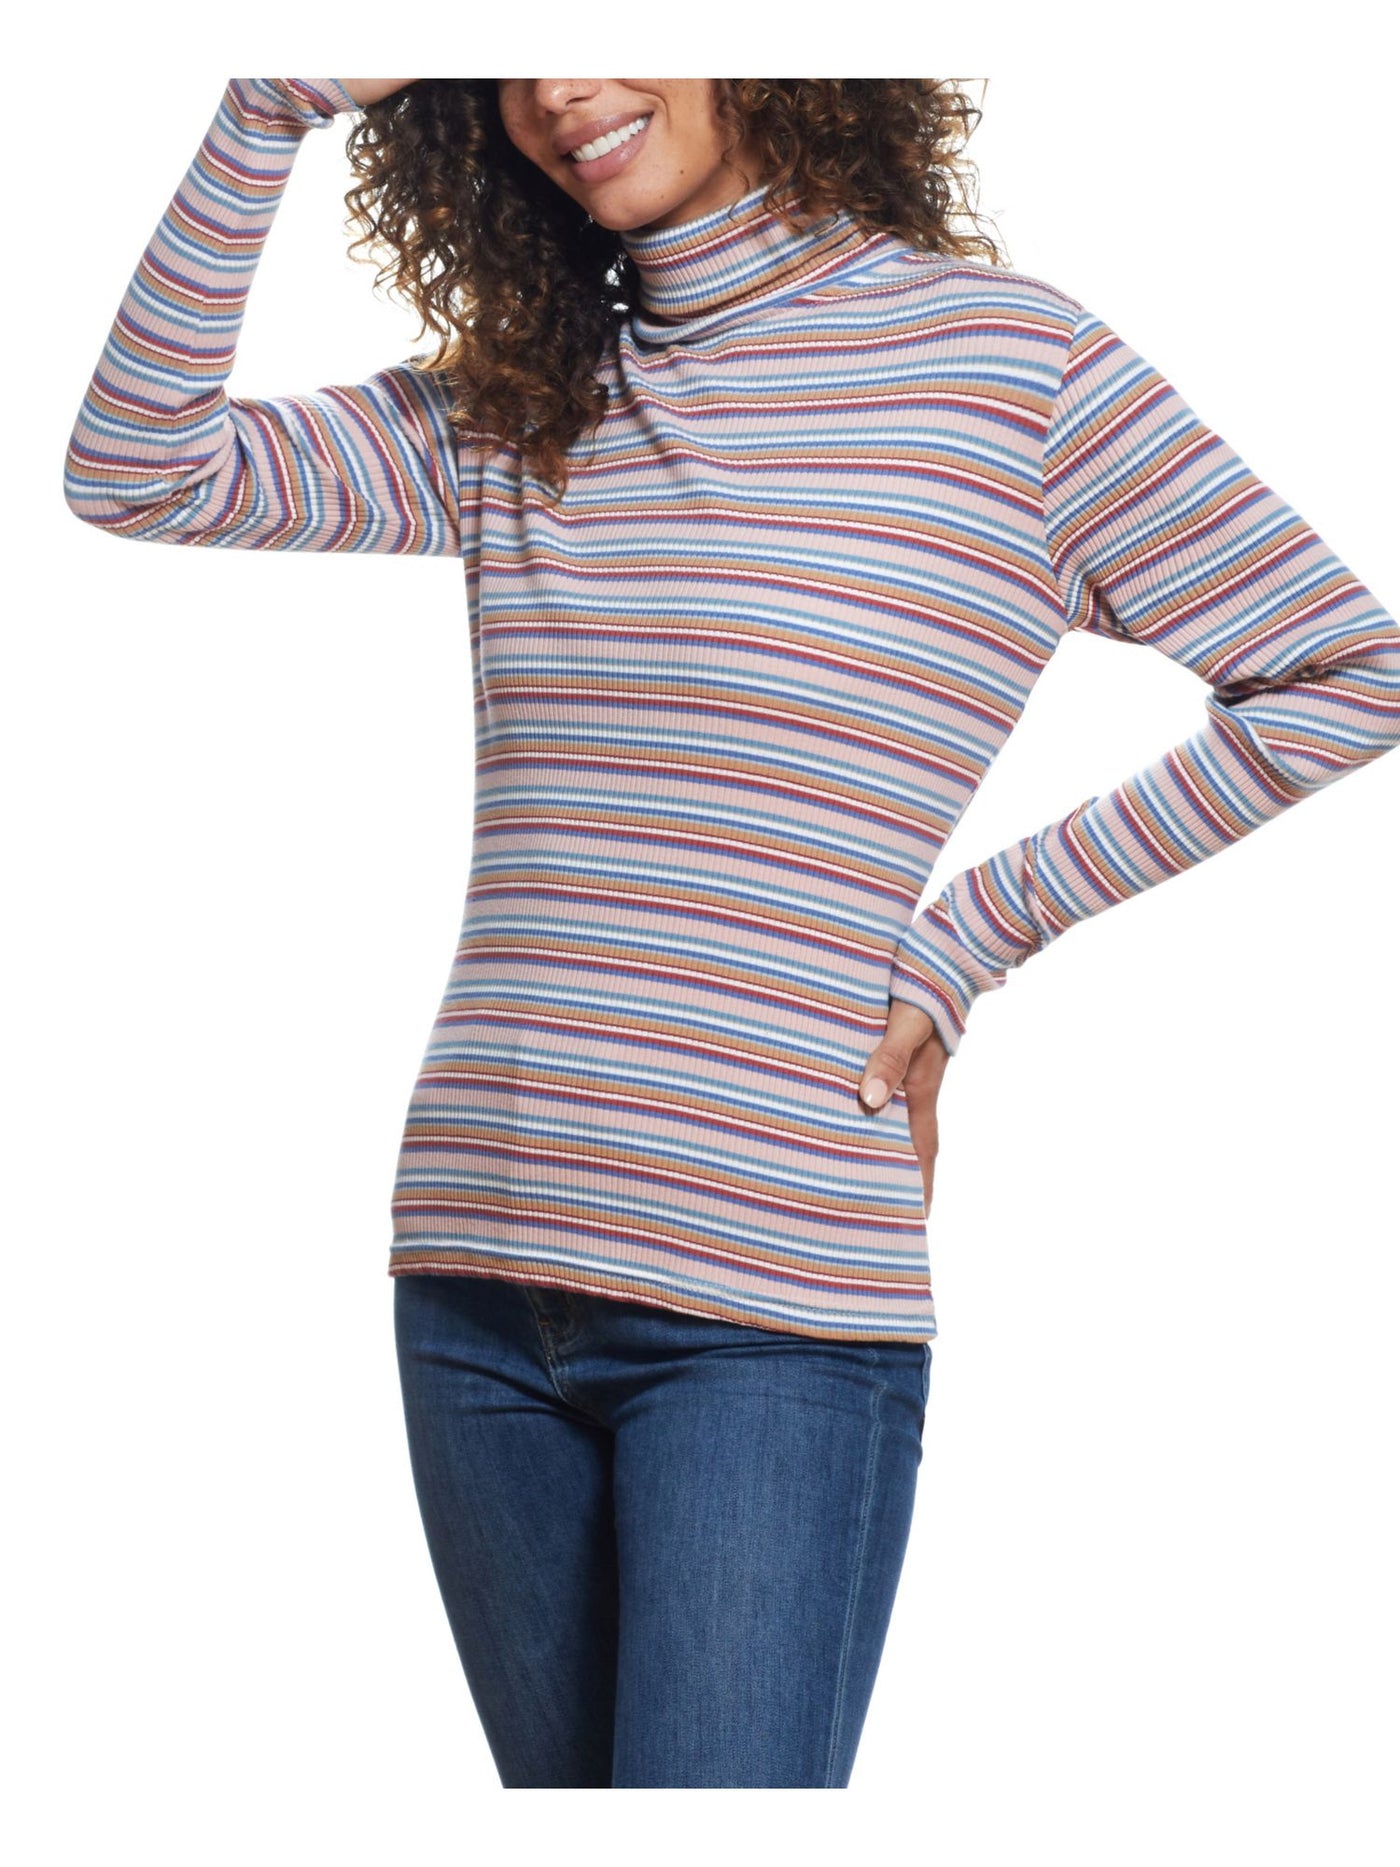 WEATHERPROOF VINTAGE Womens Pink Fitted Striped Long Sleeve Turtle Neck Top L